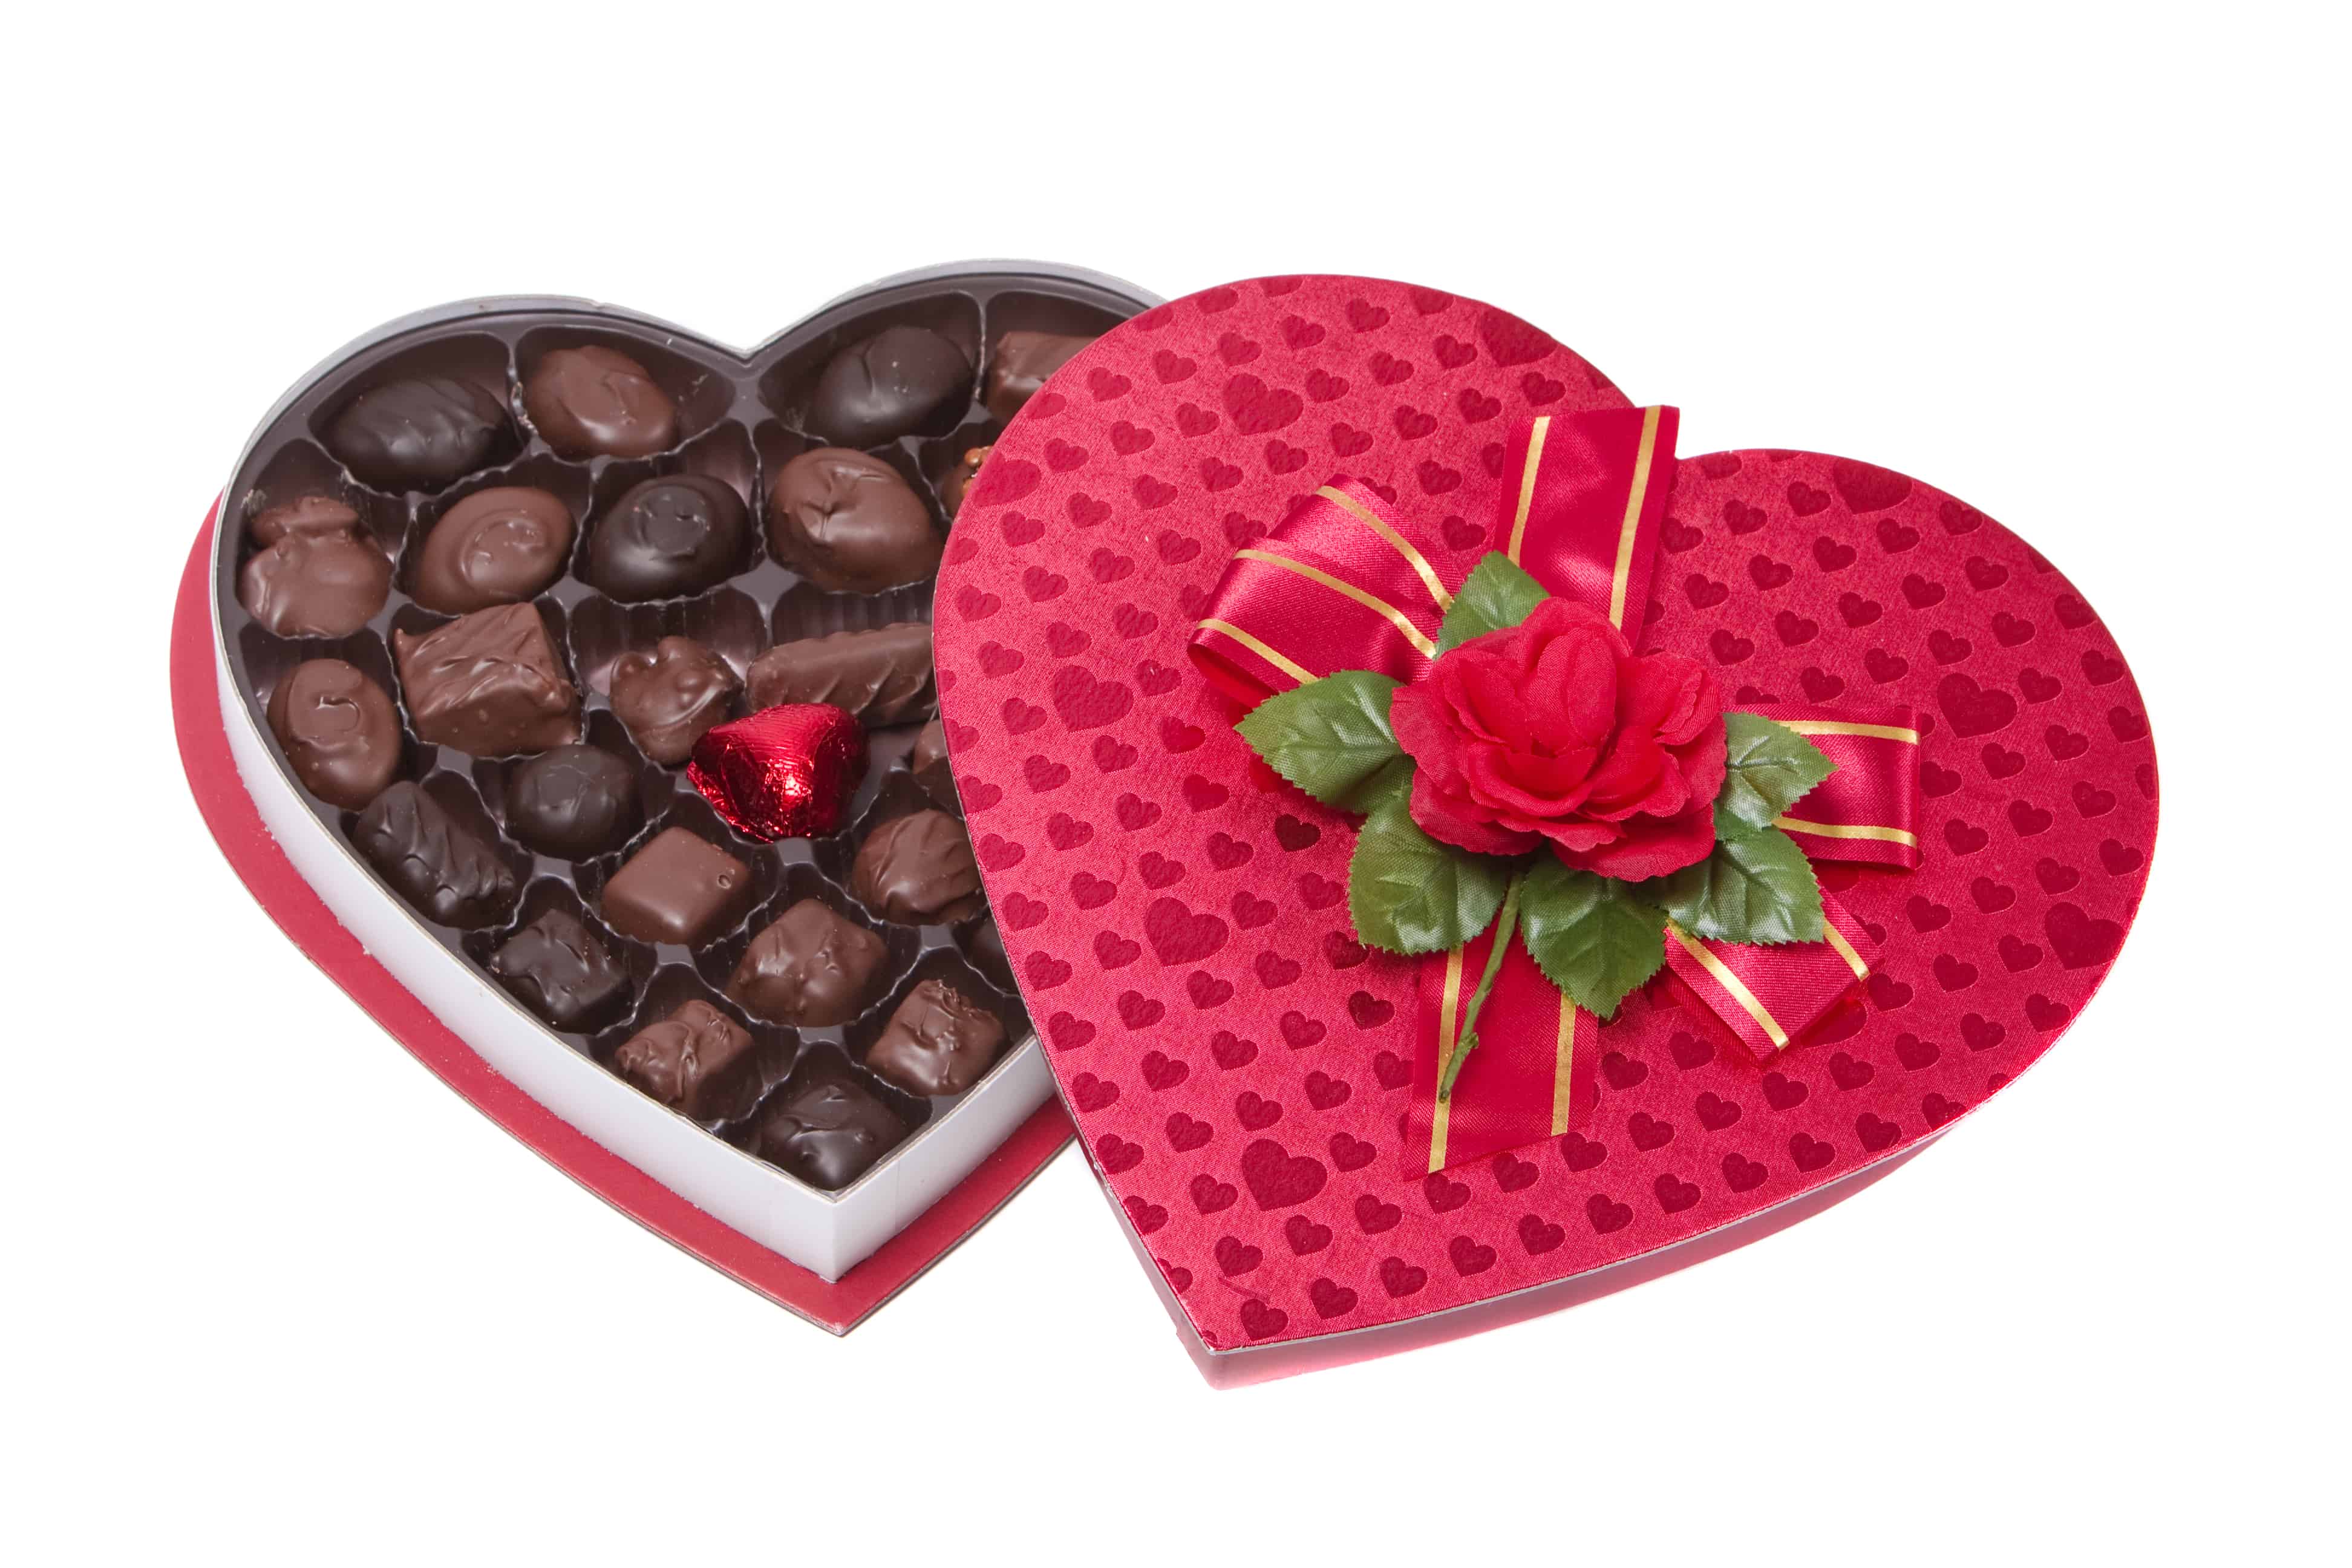 Thoughtful Gift for National Sweetest Day! - Steve's Flowers Blog